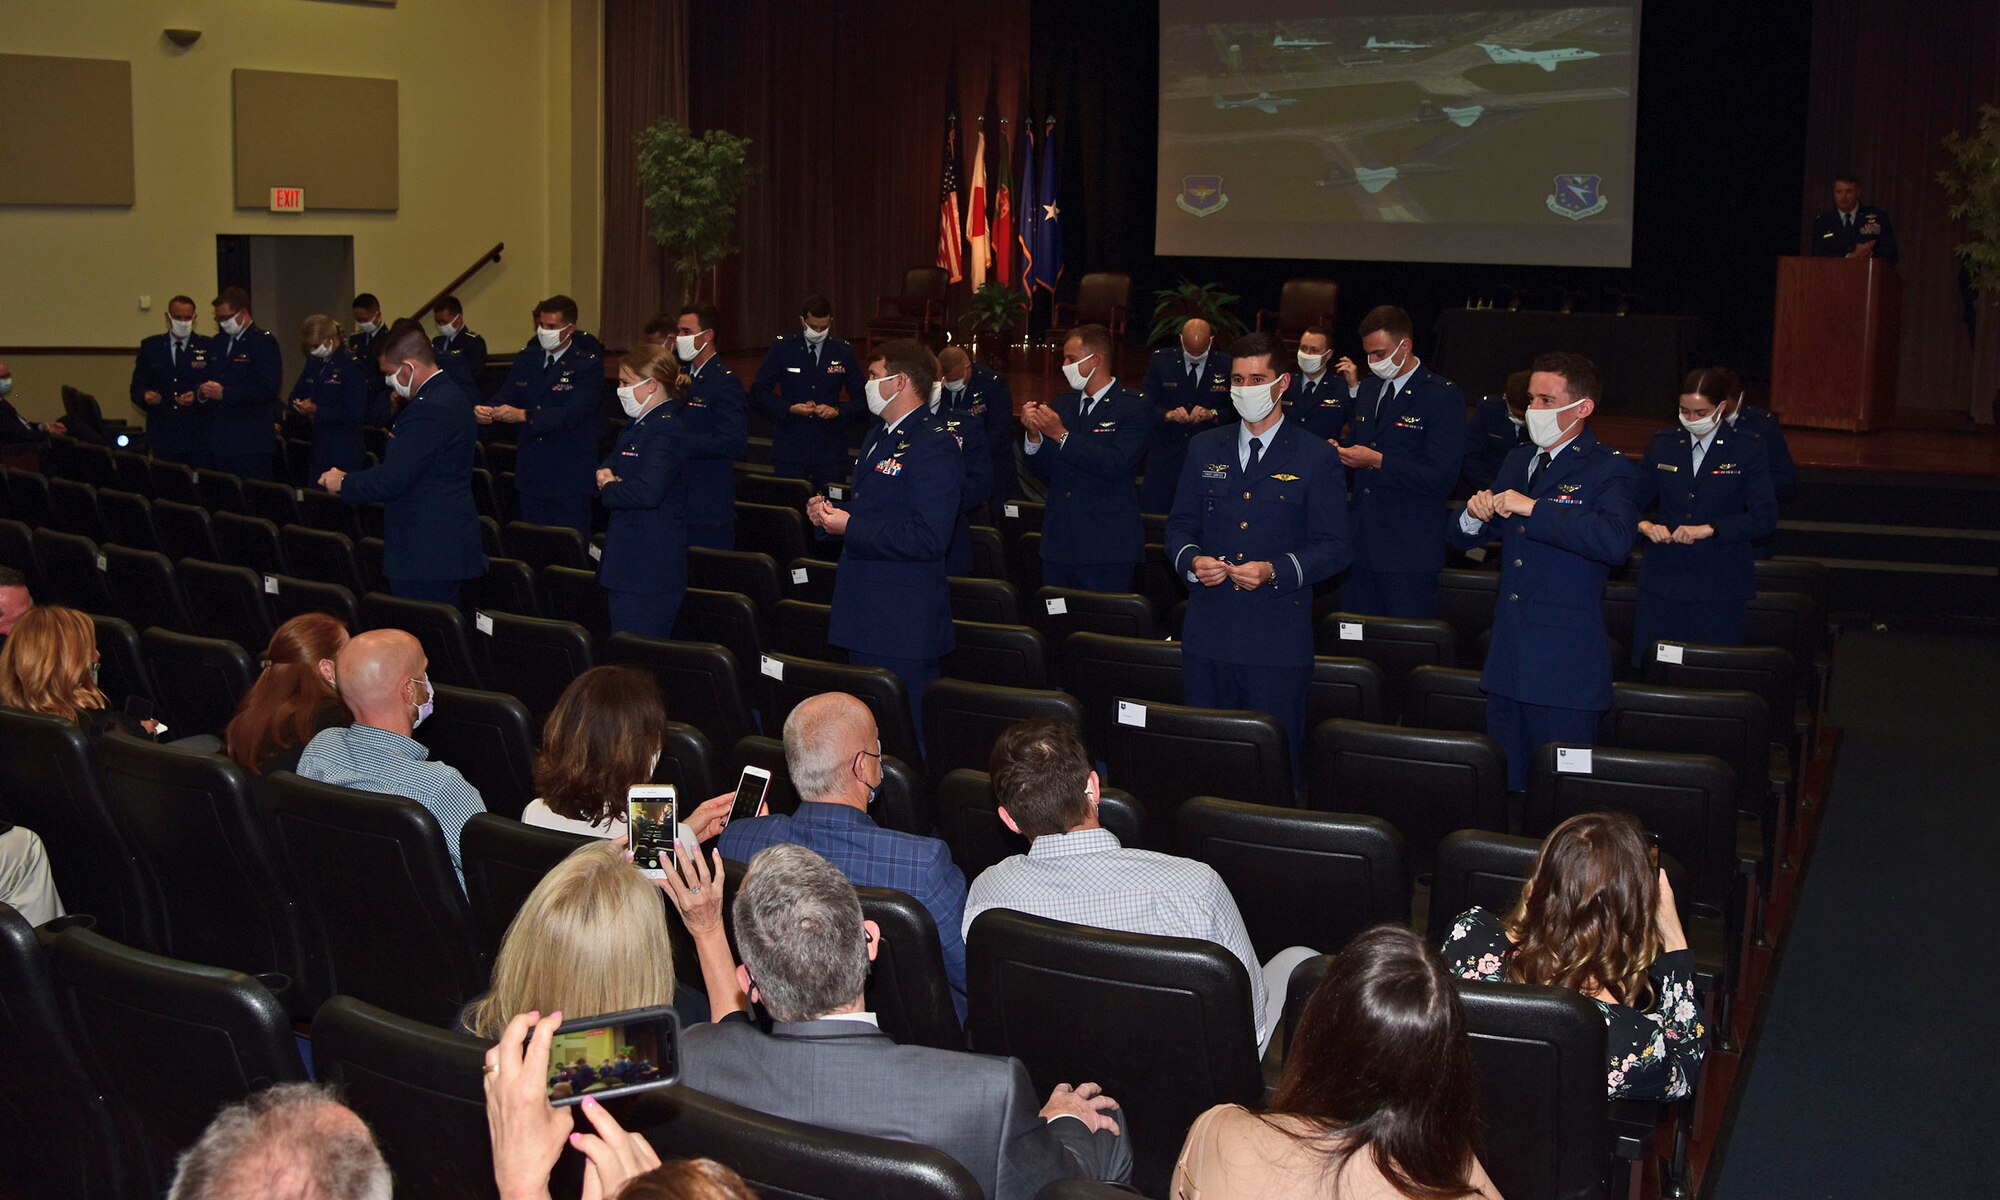 Newly graduated pilots from Class 21-08, take part in the tradition of breaking their first set of pilot wings, Apr. 16, 2021, on Columbus Air Force Base, Miss. At the peak of COVID-19 restrictions, family members were not allowed to attend graduations in person and instead watched via social media livestreams. (U.S. Air Force photo by Melissa Duncan-Doublin)